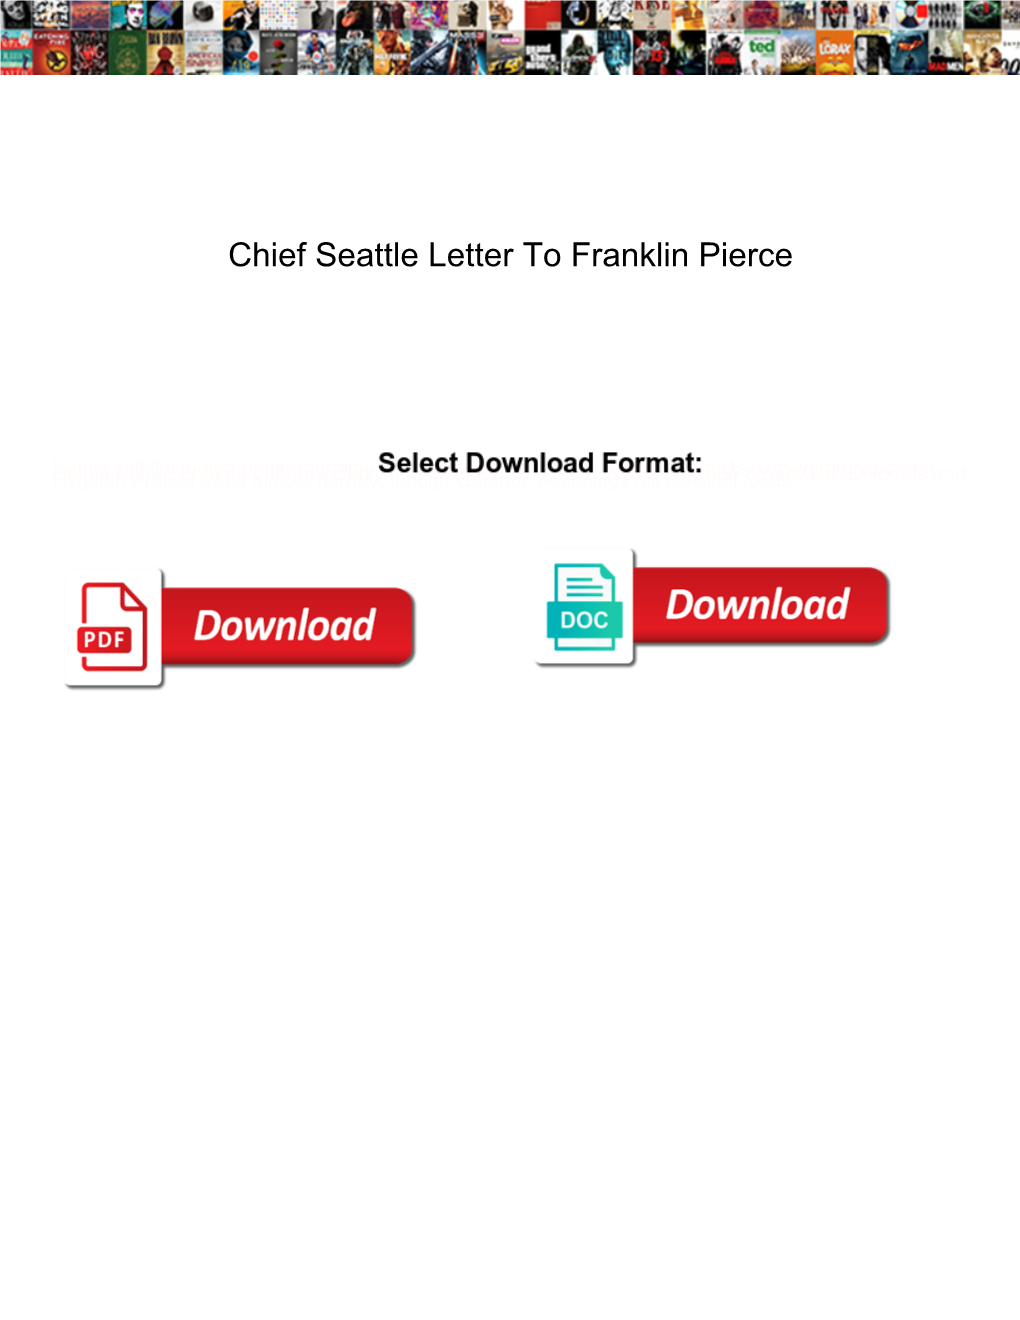 Chief Seattle Letter to Franklin Pierce